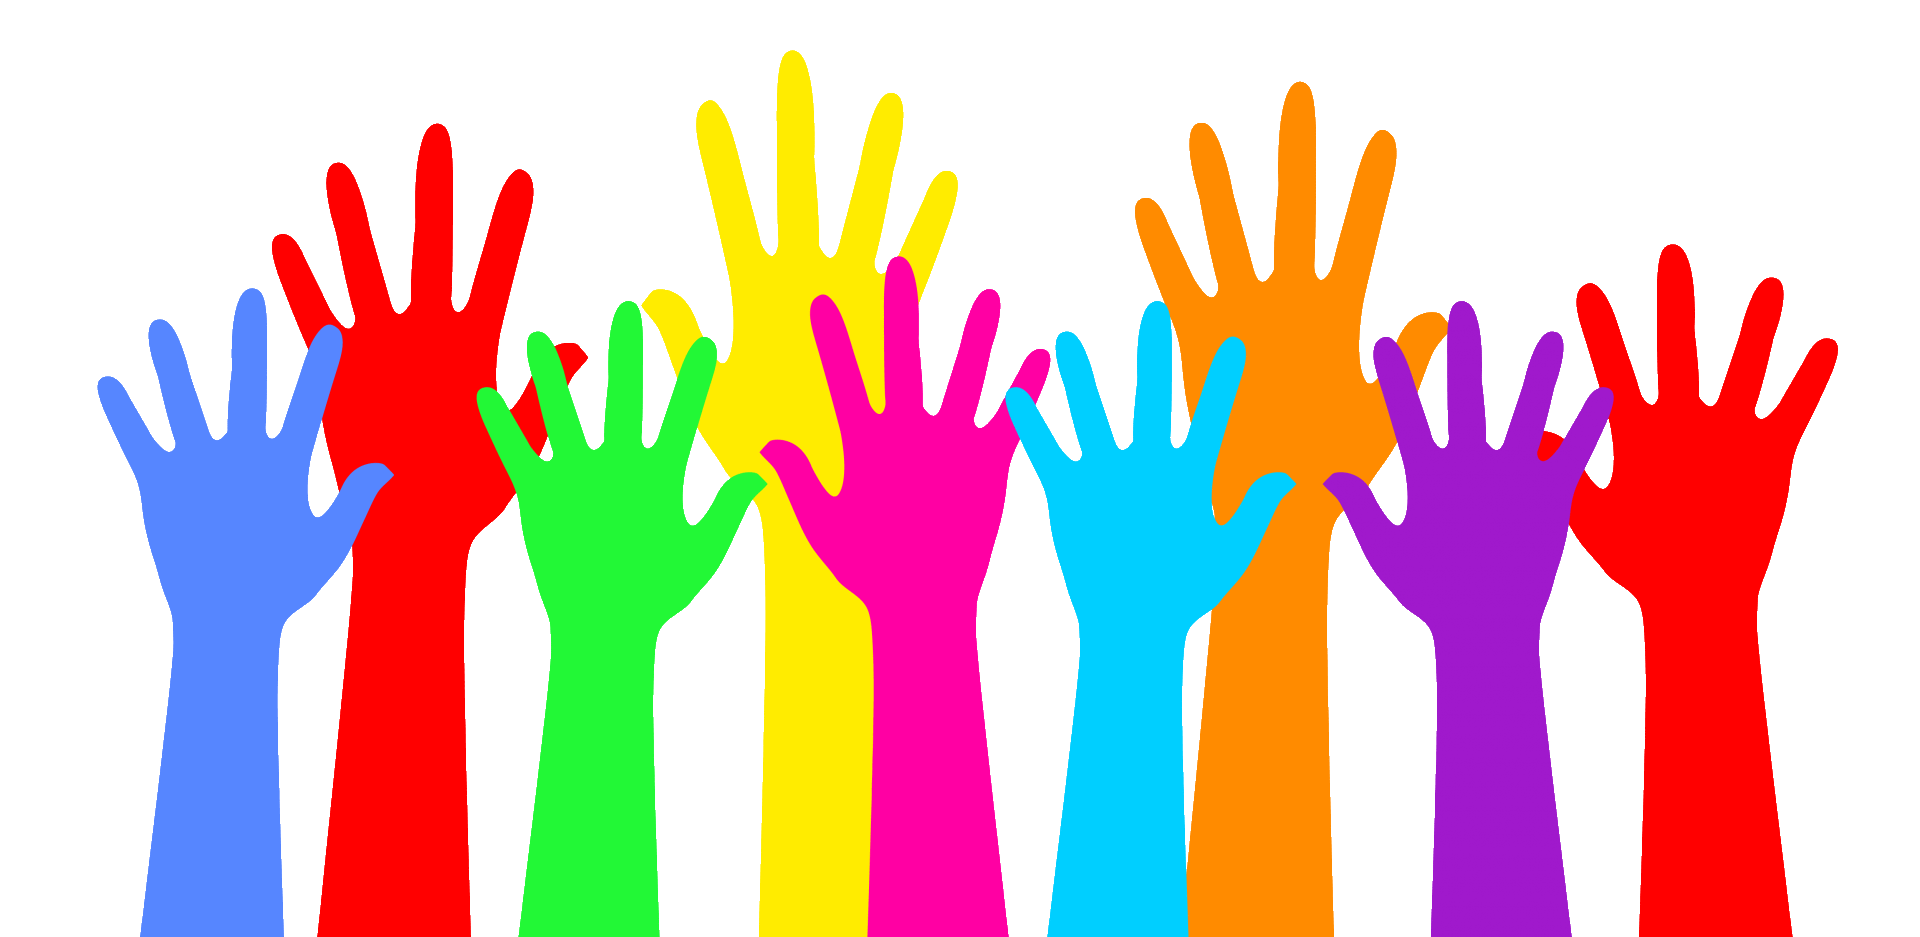 Raised hands (all colors)